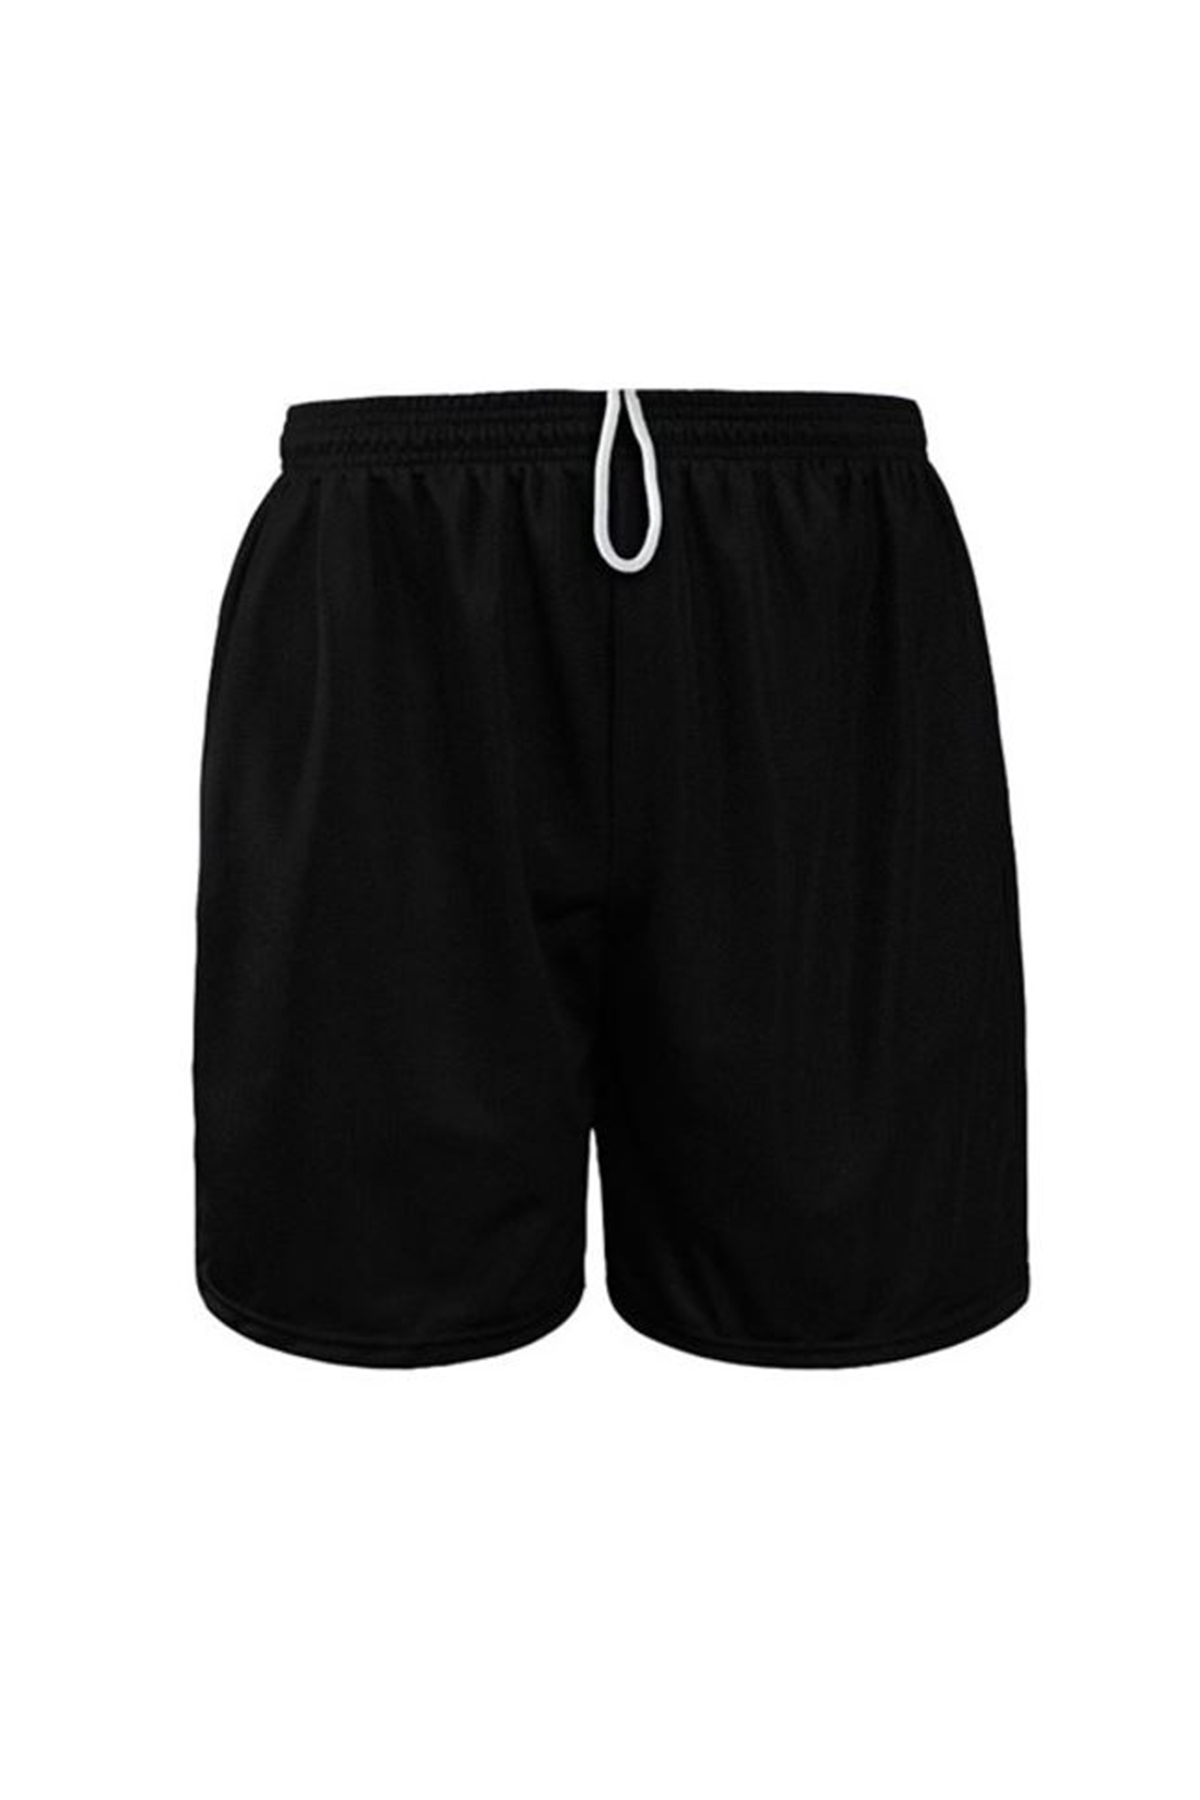 Co Ed Adult Closed Mesh Shorts 7 Ramco French Toast